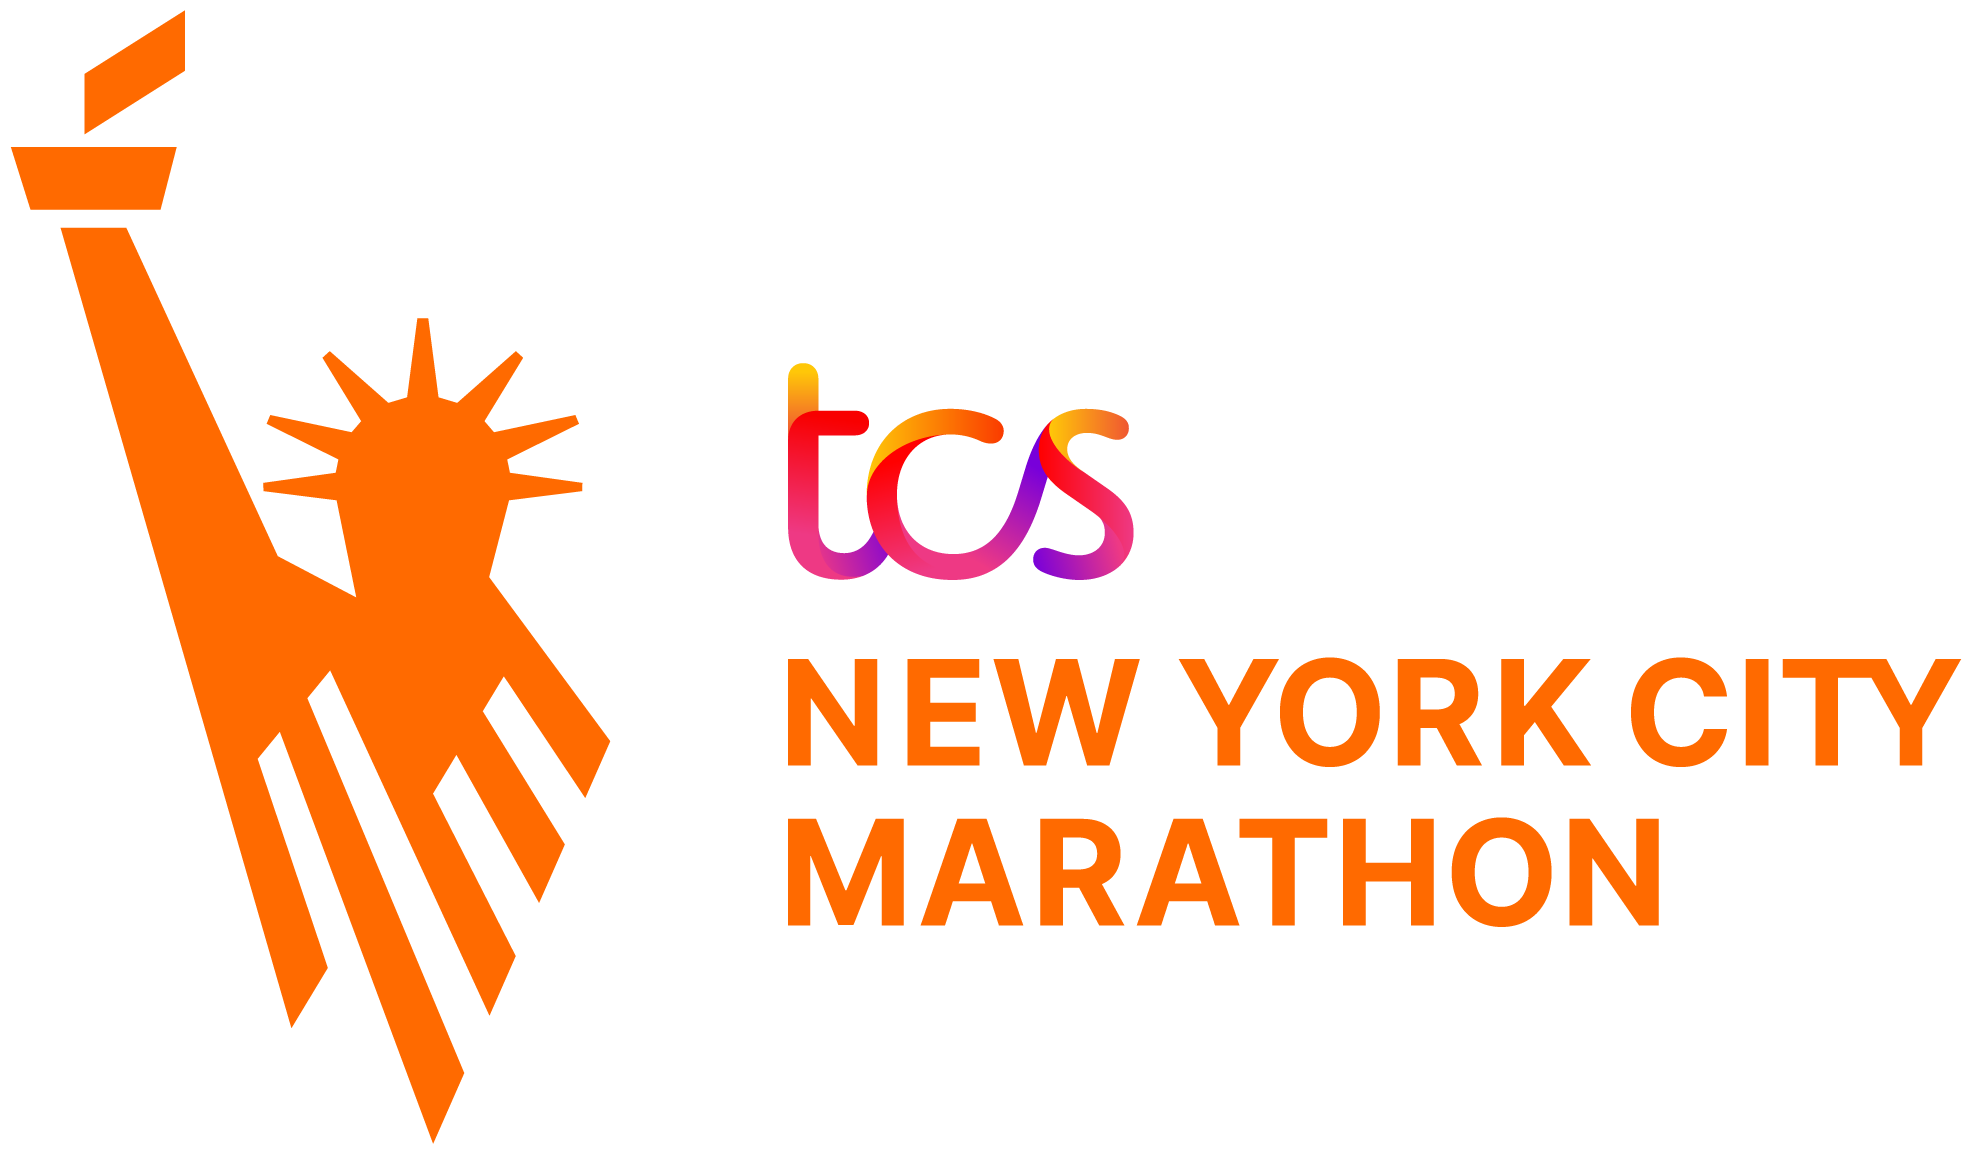 TCS New York City Marathon Team Inspire to Feature 26 of the Most